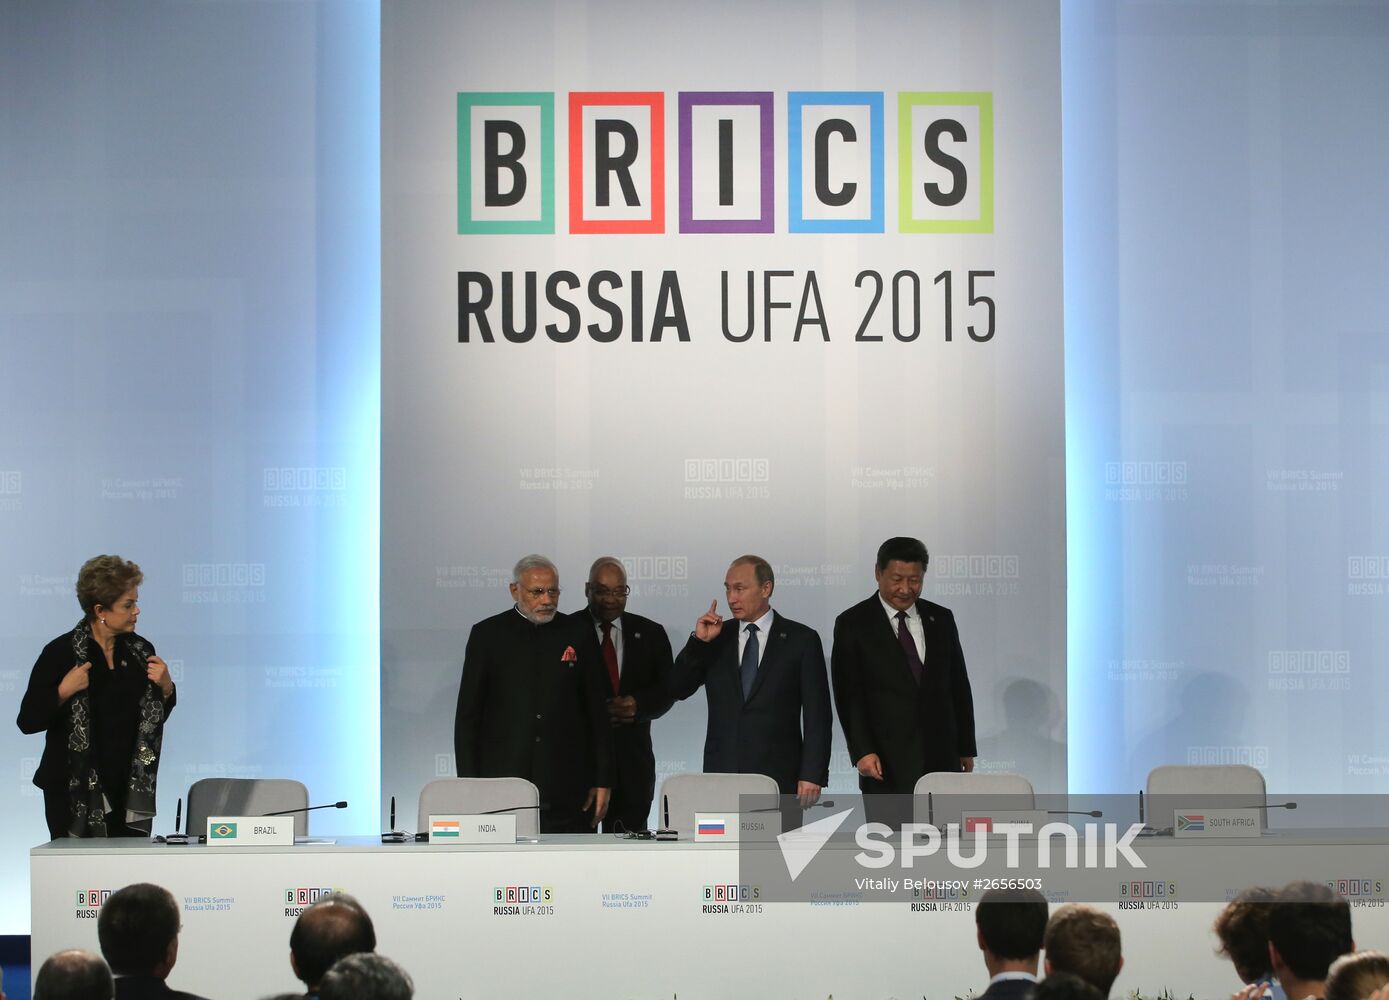 Signing of joint documents following the BRICS leaders meeting